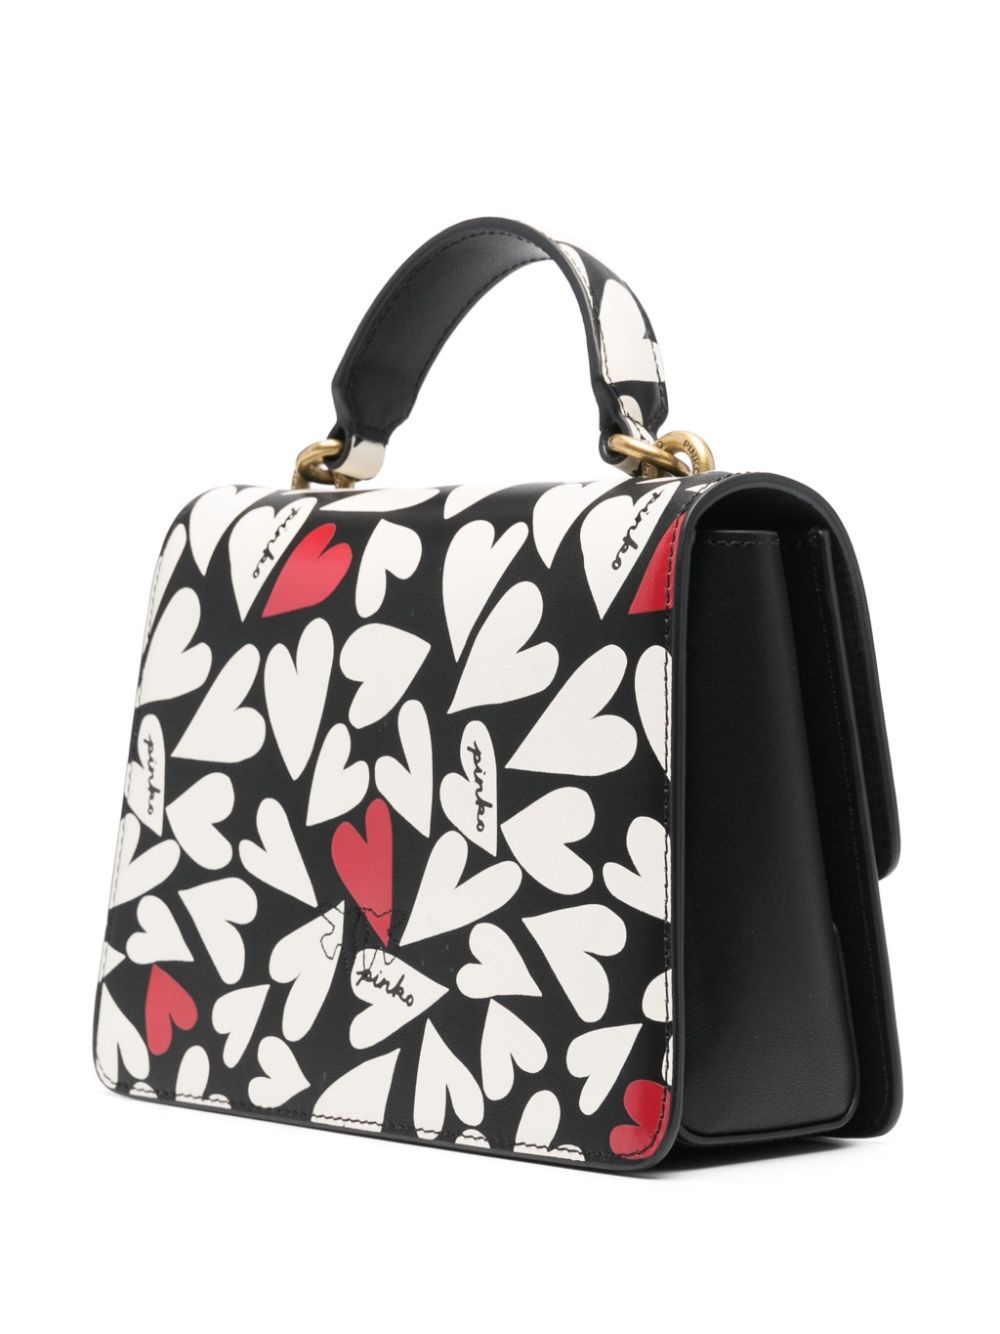 Love Birds leather tote bag - 3